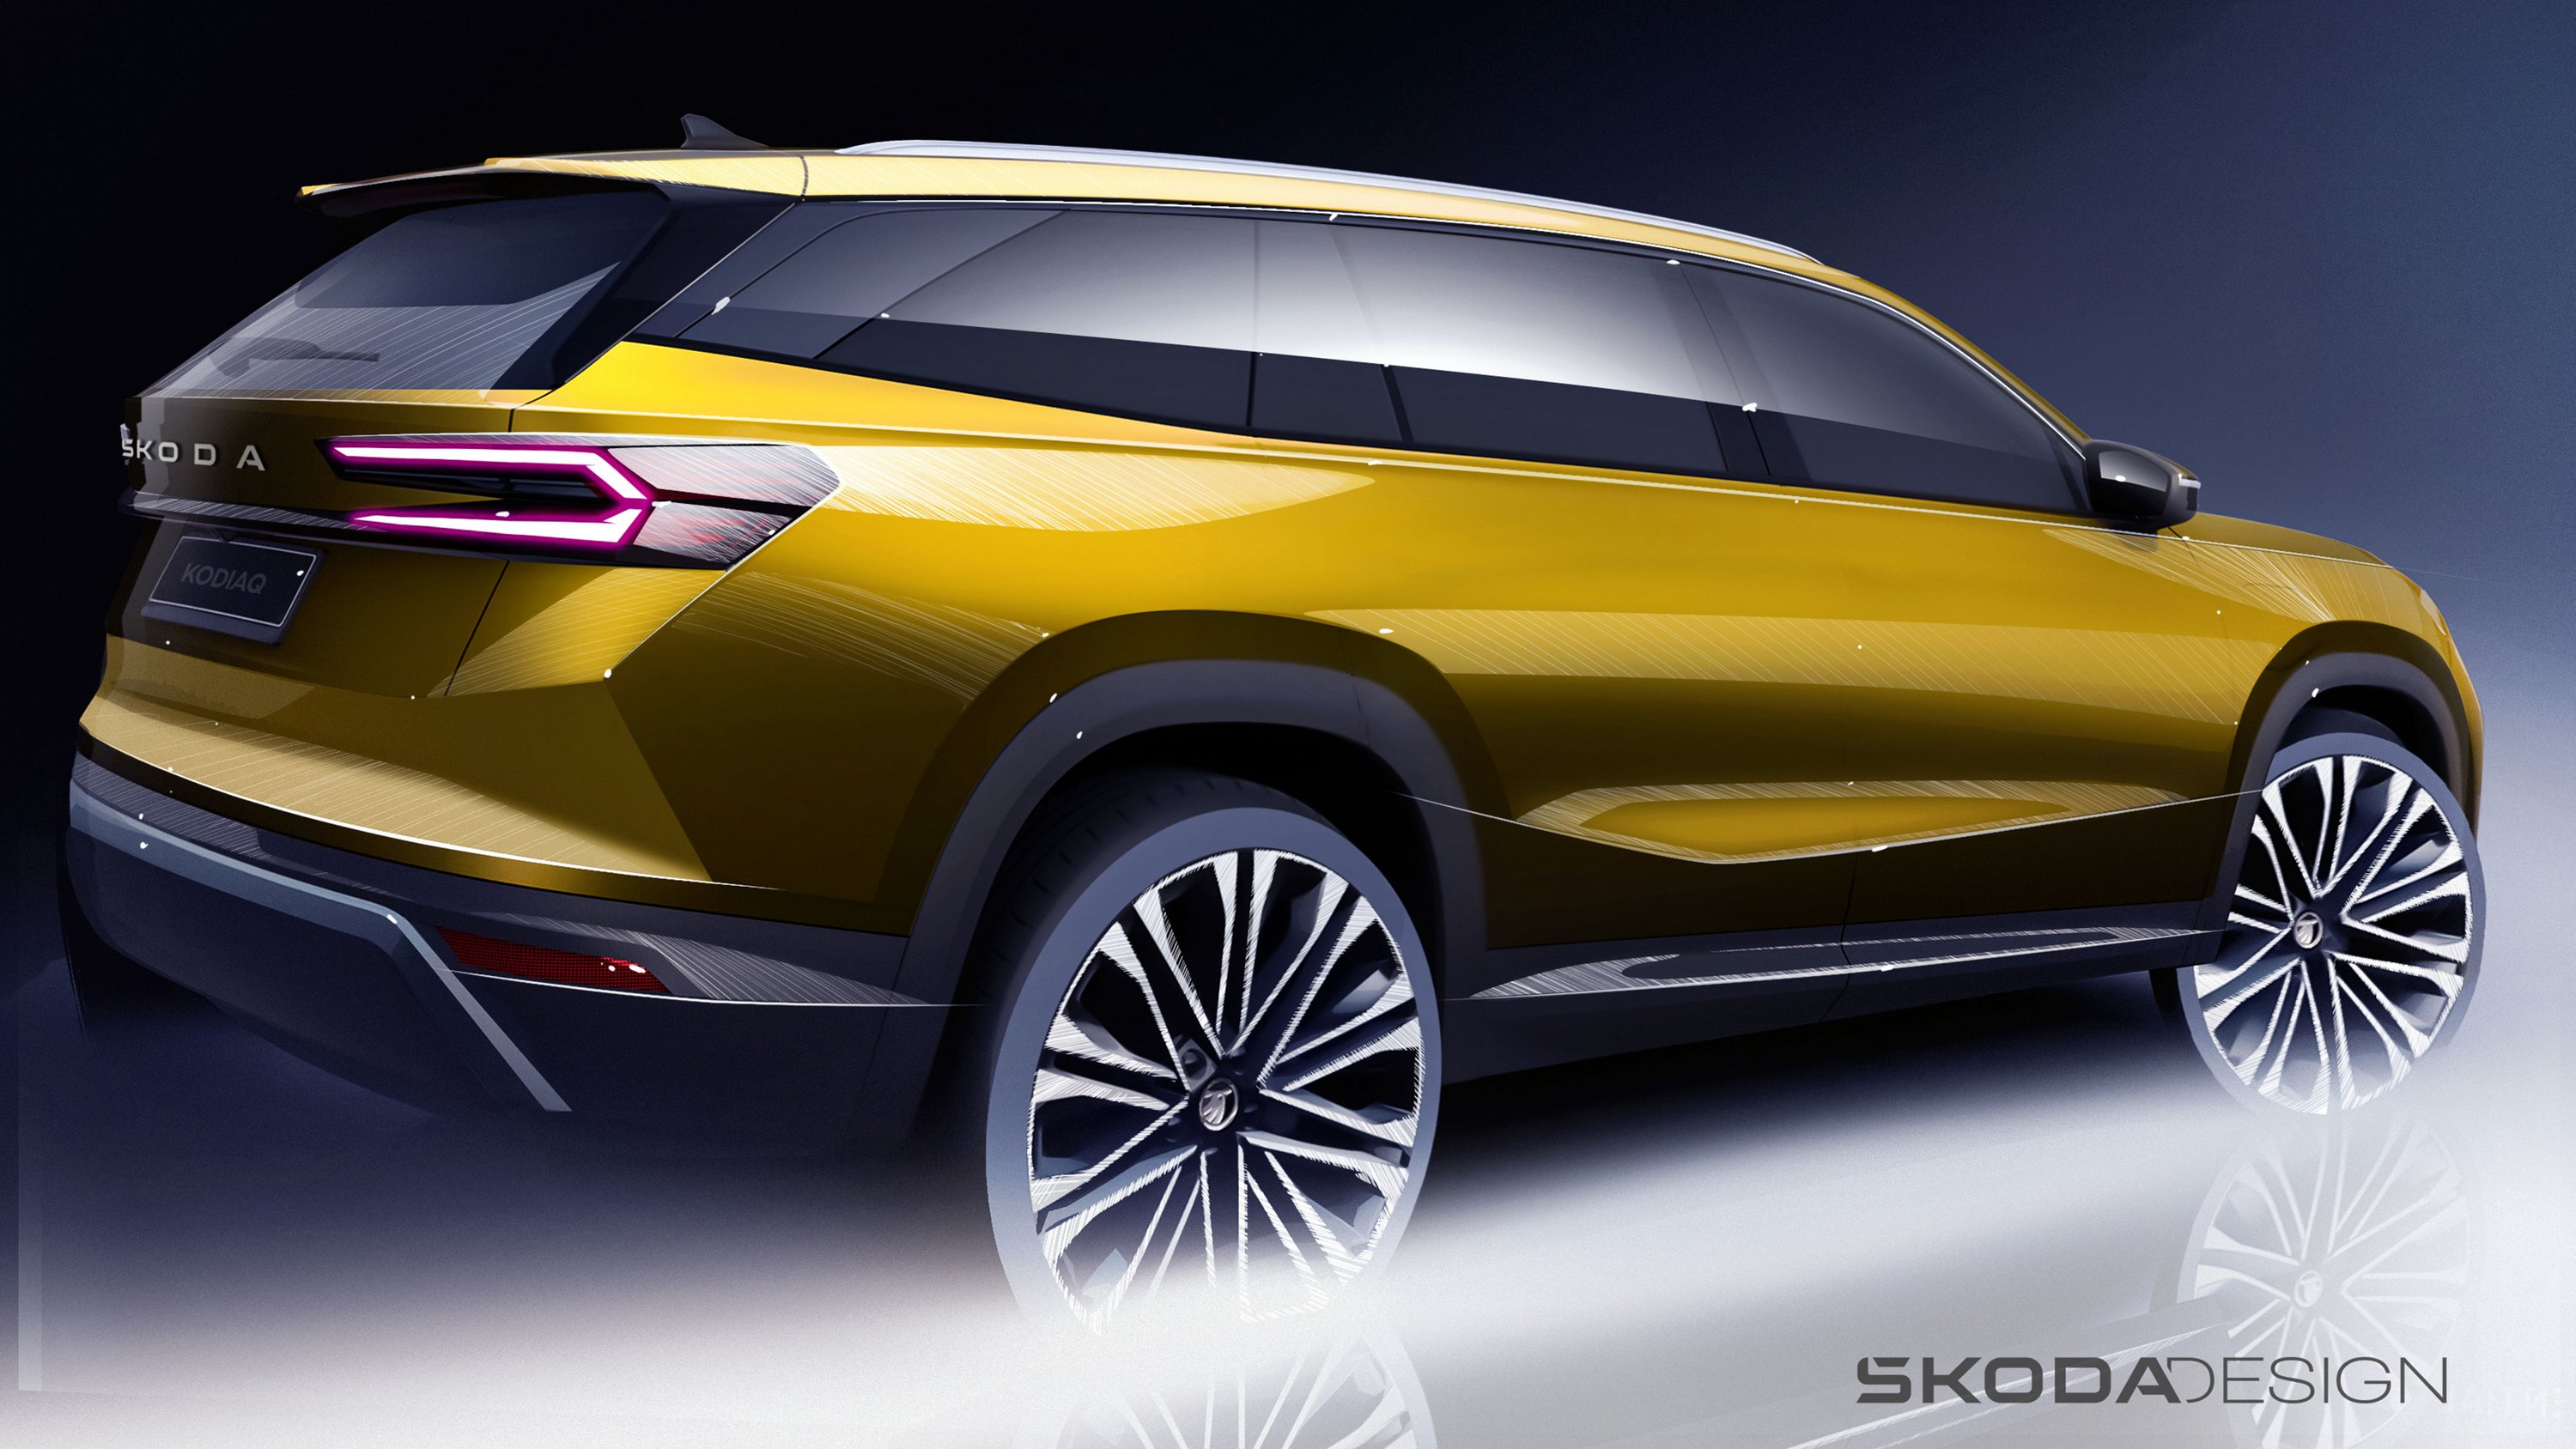 The first images show the new seven-seater Skoda 3